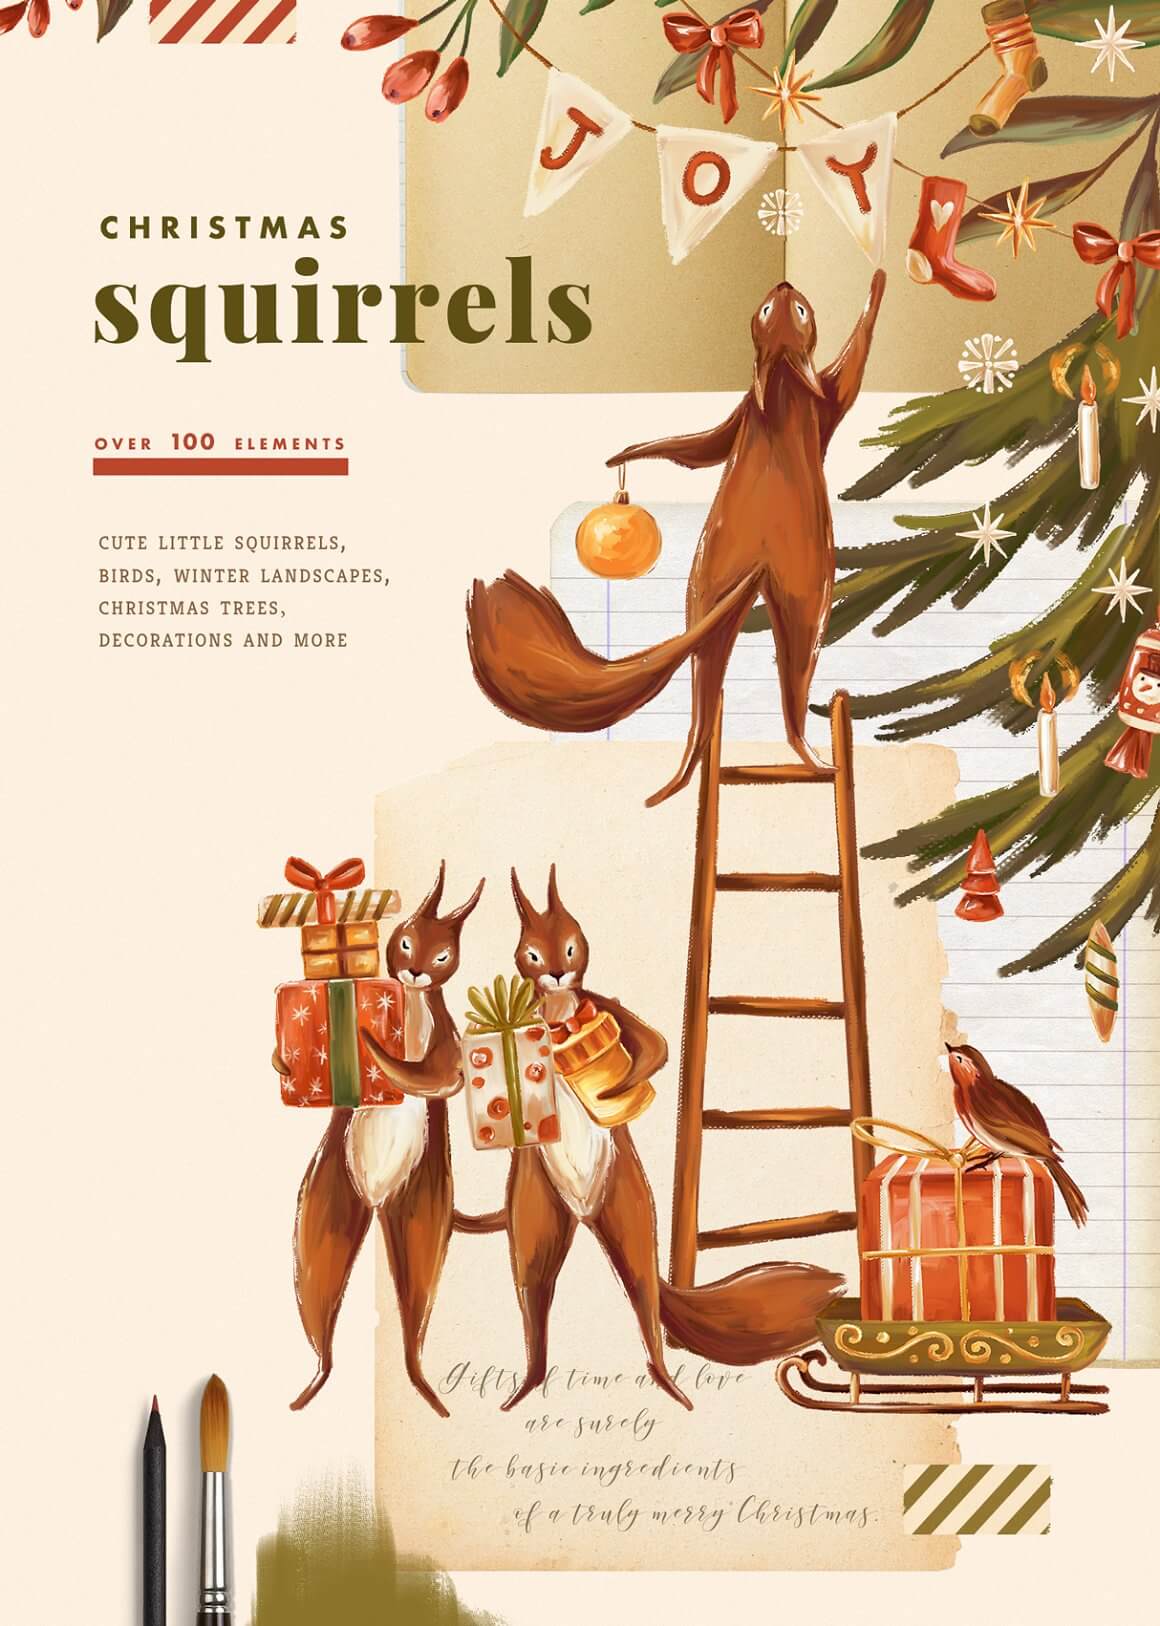 Cute little squirrels, birds, winter landscapes, christmas trees, decorations and more.